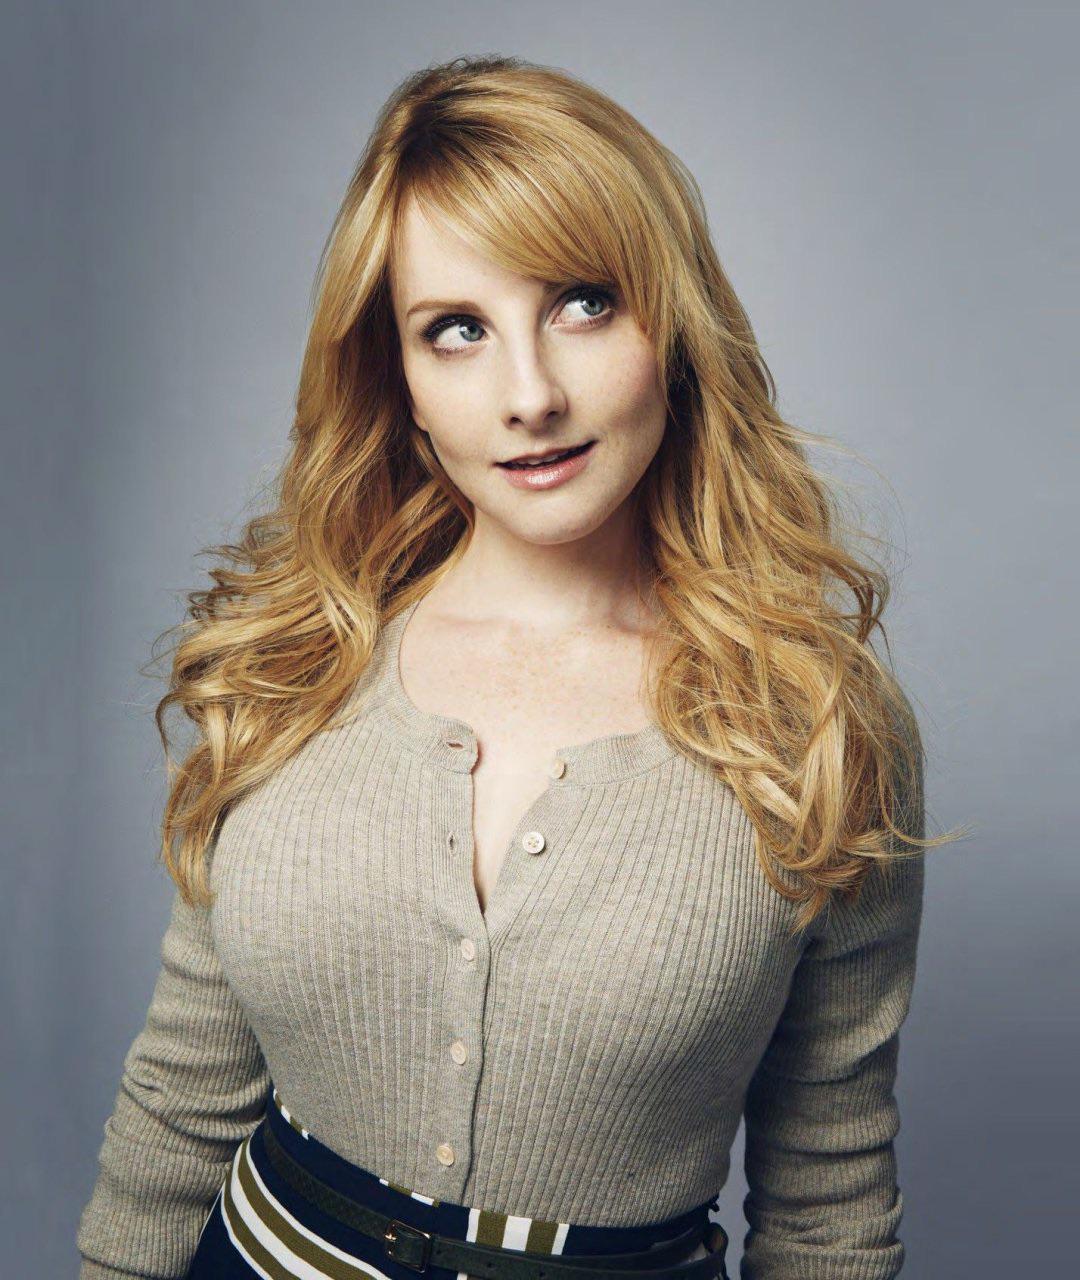 Melissa Rauch’s huge sweater puppies are making me feel so weak this morning. Wish I had a whole group of buds to line up and fuck those tits and cum all over her pretty face with me. 🥵